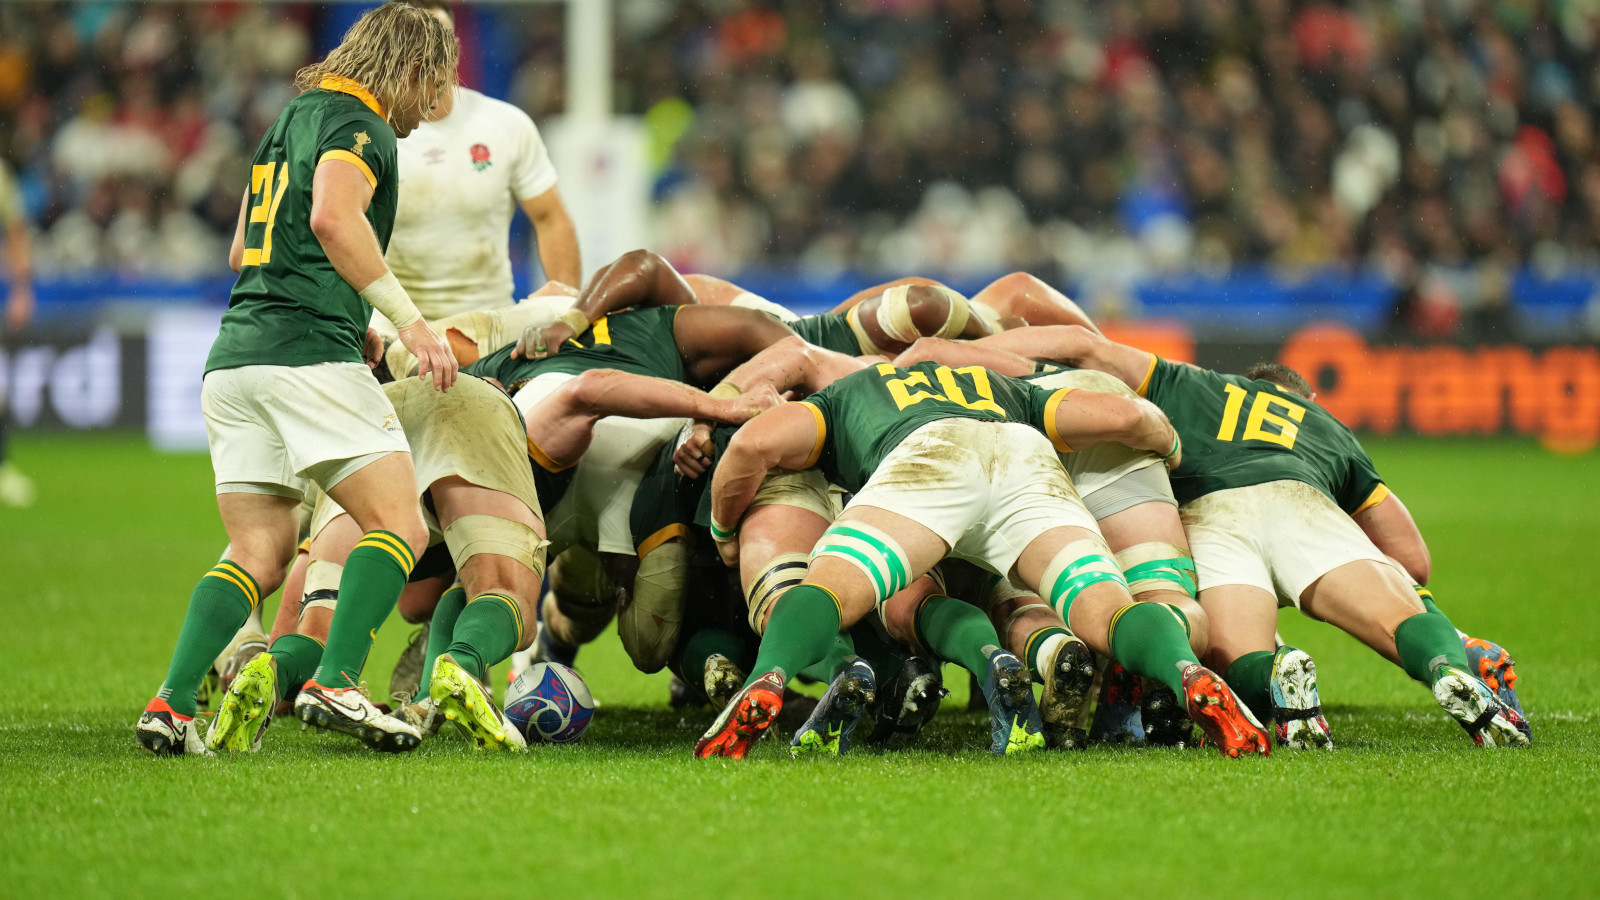 world rugby confirm much debated ‘fan-focused’ law changes that depower scrums